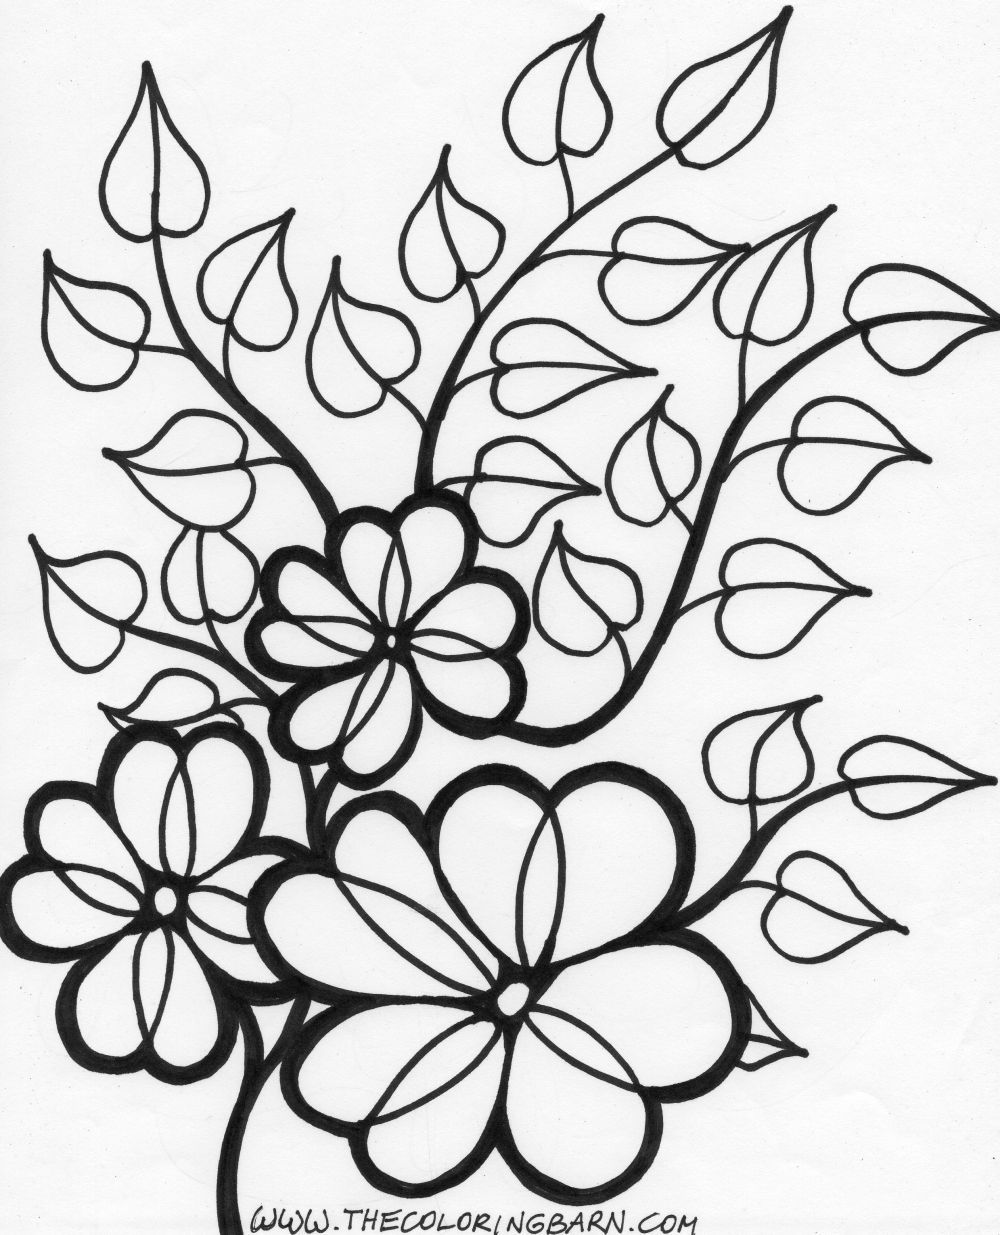 Flowers 20   Printable Flower Coloring Pages, Flower Coloring ...